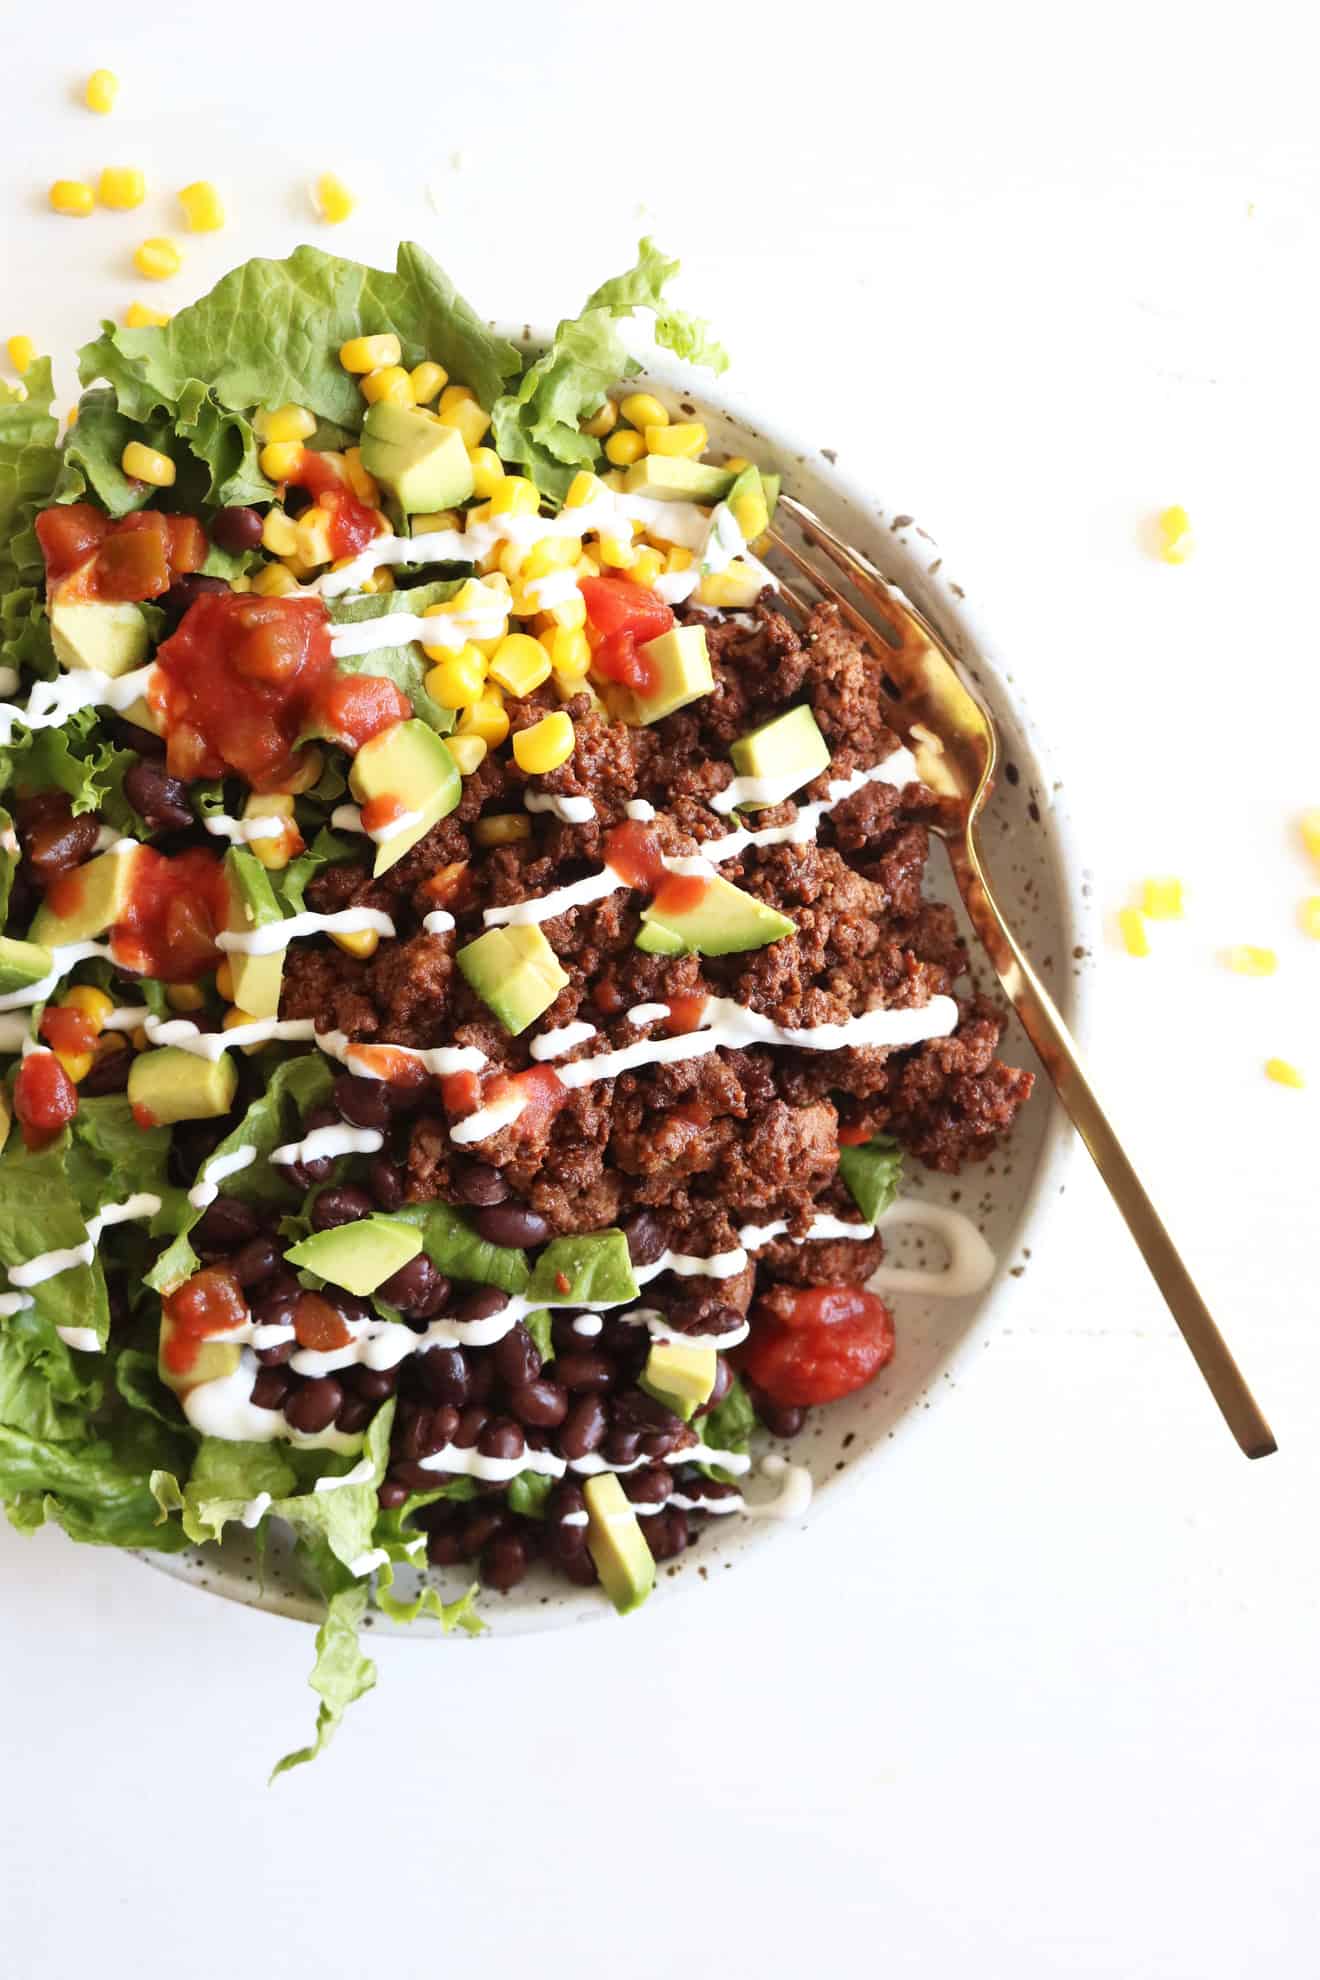 This is an overhead image of a bowl filled with lettuce, ground beef, salsa, avocado, corn, black beans, and sour cream. The bowl sits on a white counter.